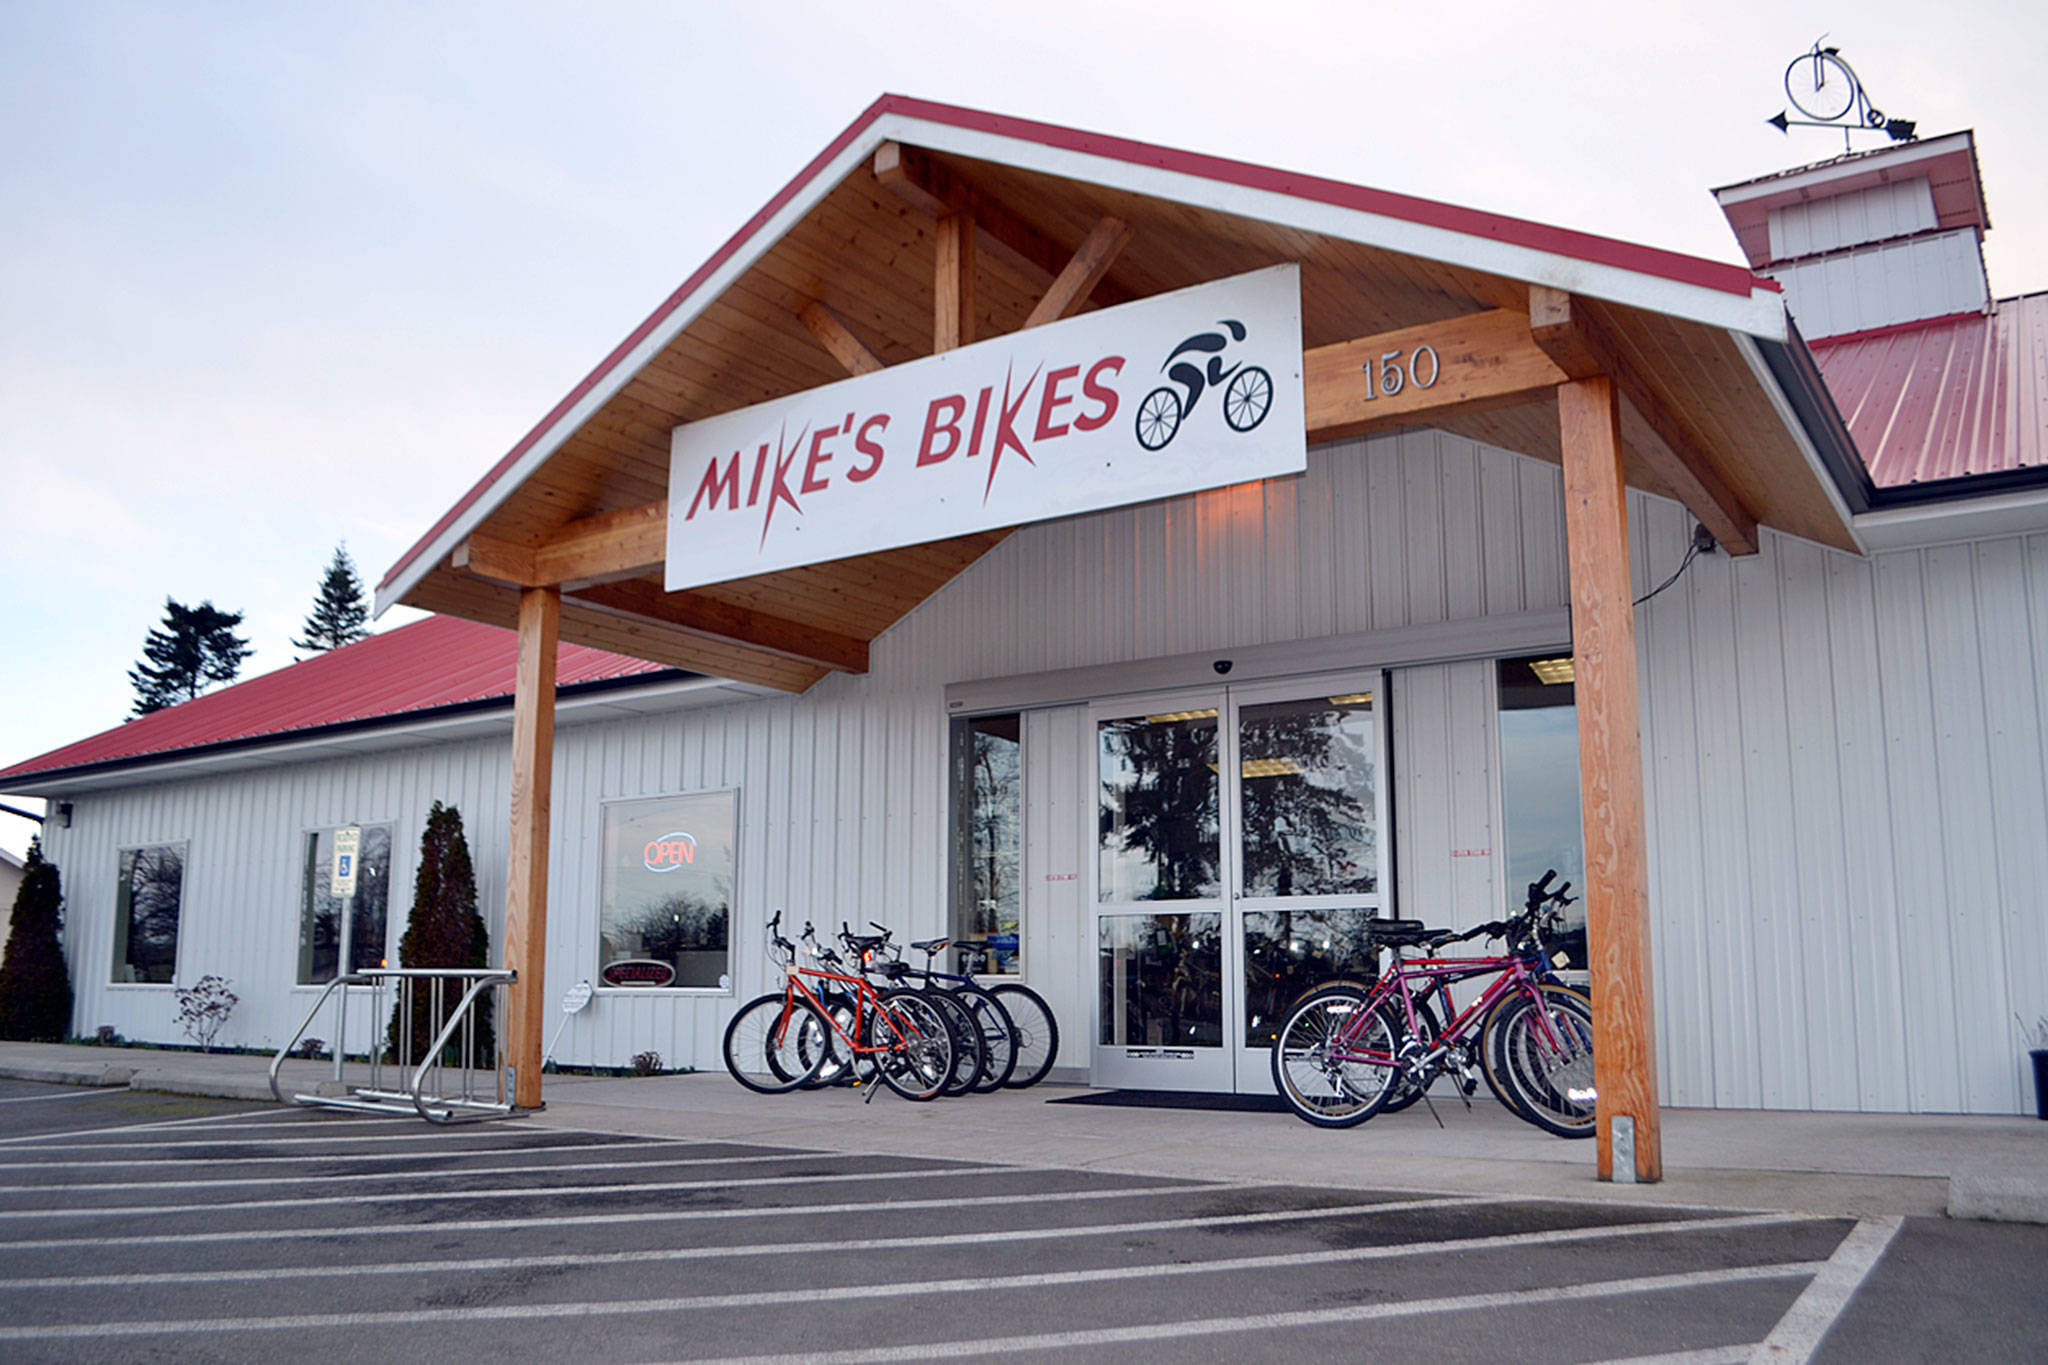 In 2013, Mike Wanner, owner of Mike’s Bikes in Sequim, changed his business’ name to All Around Bikes to avoid a lawsuit from a California company with the name trademarked.